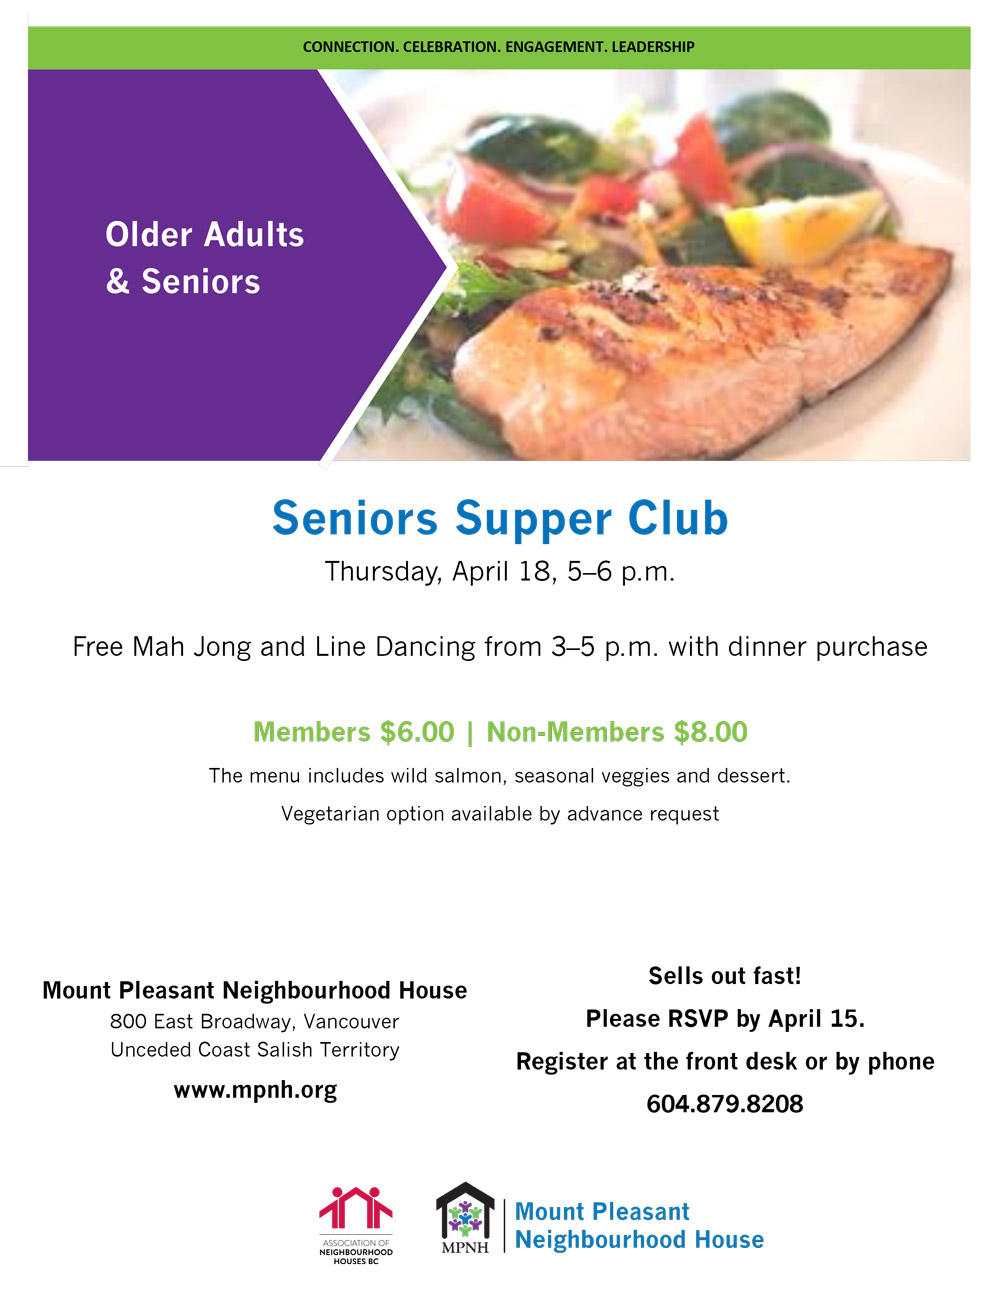 An image of the poster, featuring a photo of a salmon fillet with vegetables. Includes event details.